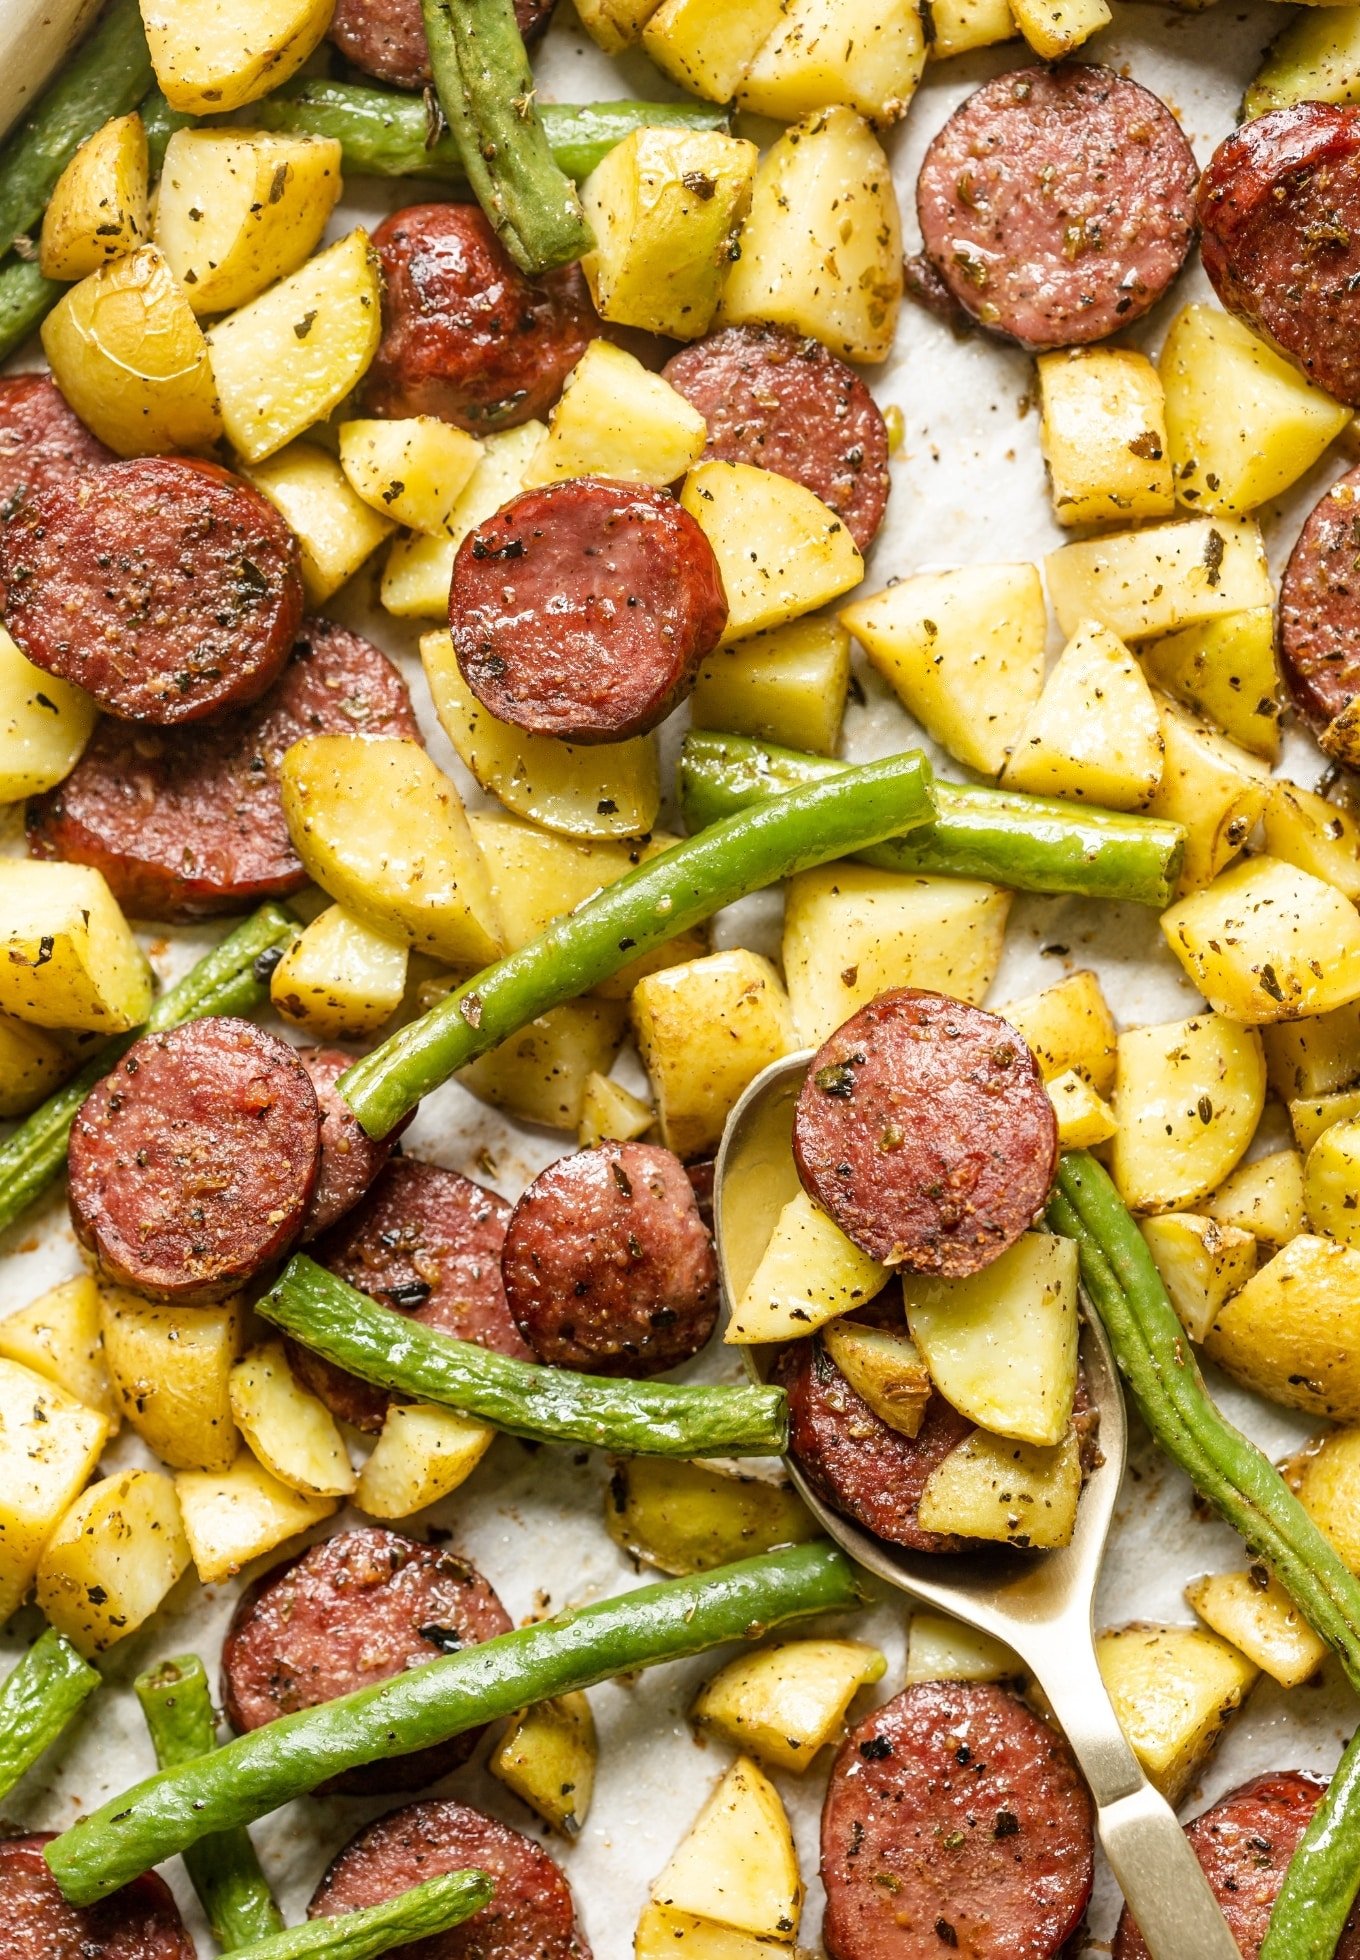 https://thewholecook.com/wp-content/uploads/2021/04/Sausage-with-Potatoes-Green-Beans-by-The-Whole-Cook-vertical-2.jpg